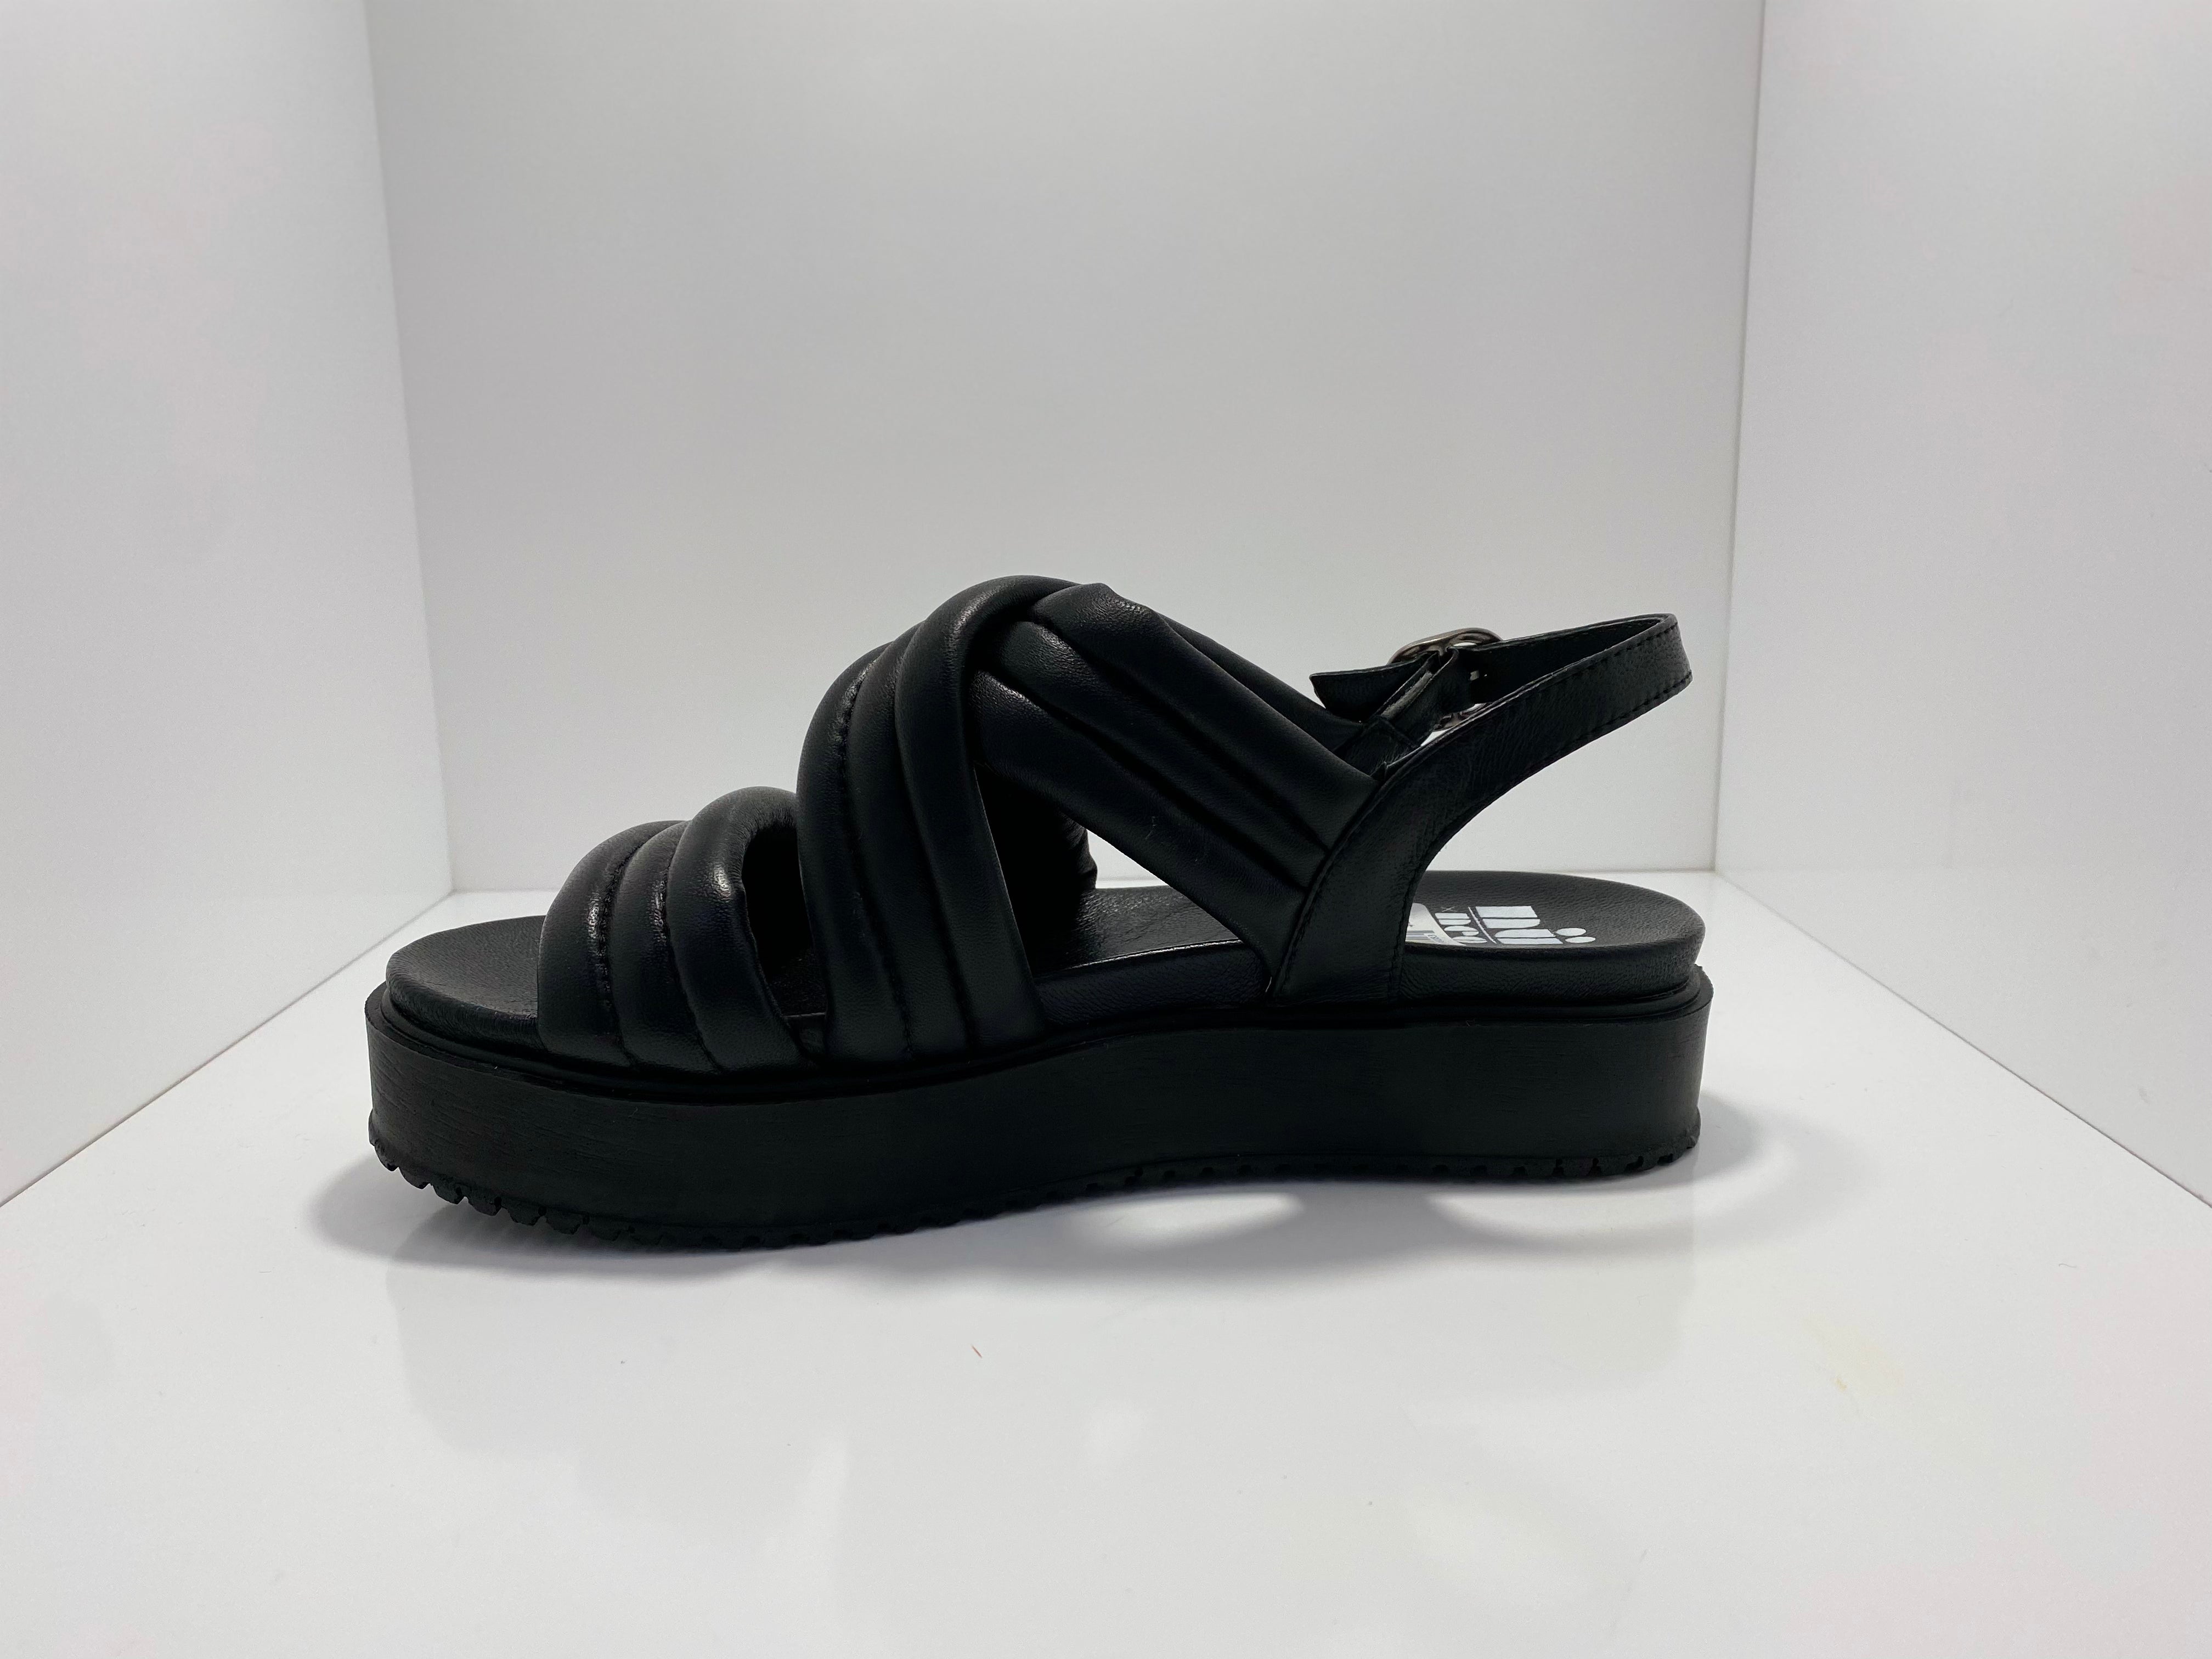 Genesis Soft Padded Leather Sandal AT-538